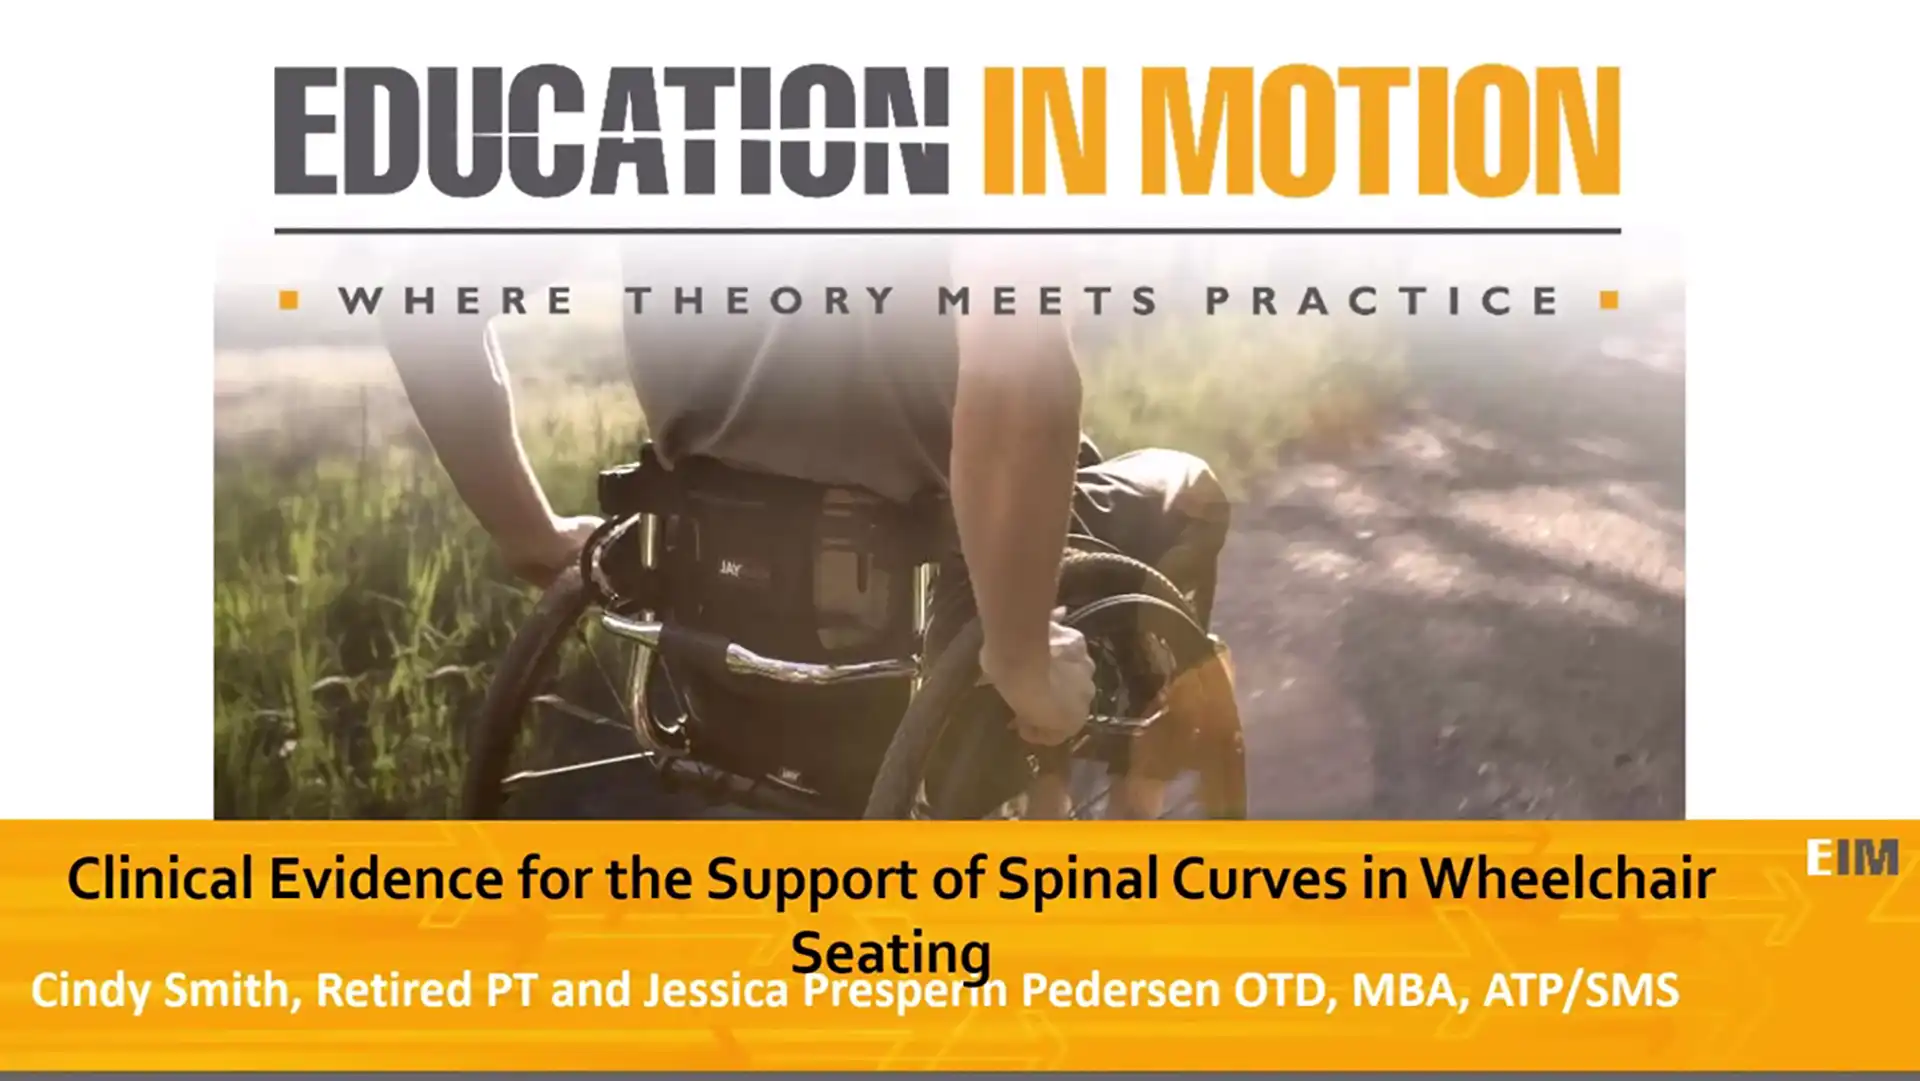 Clinical Evidence for the Support of Spinal Curves in Wheelchair Seating